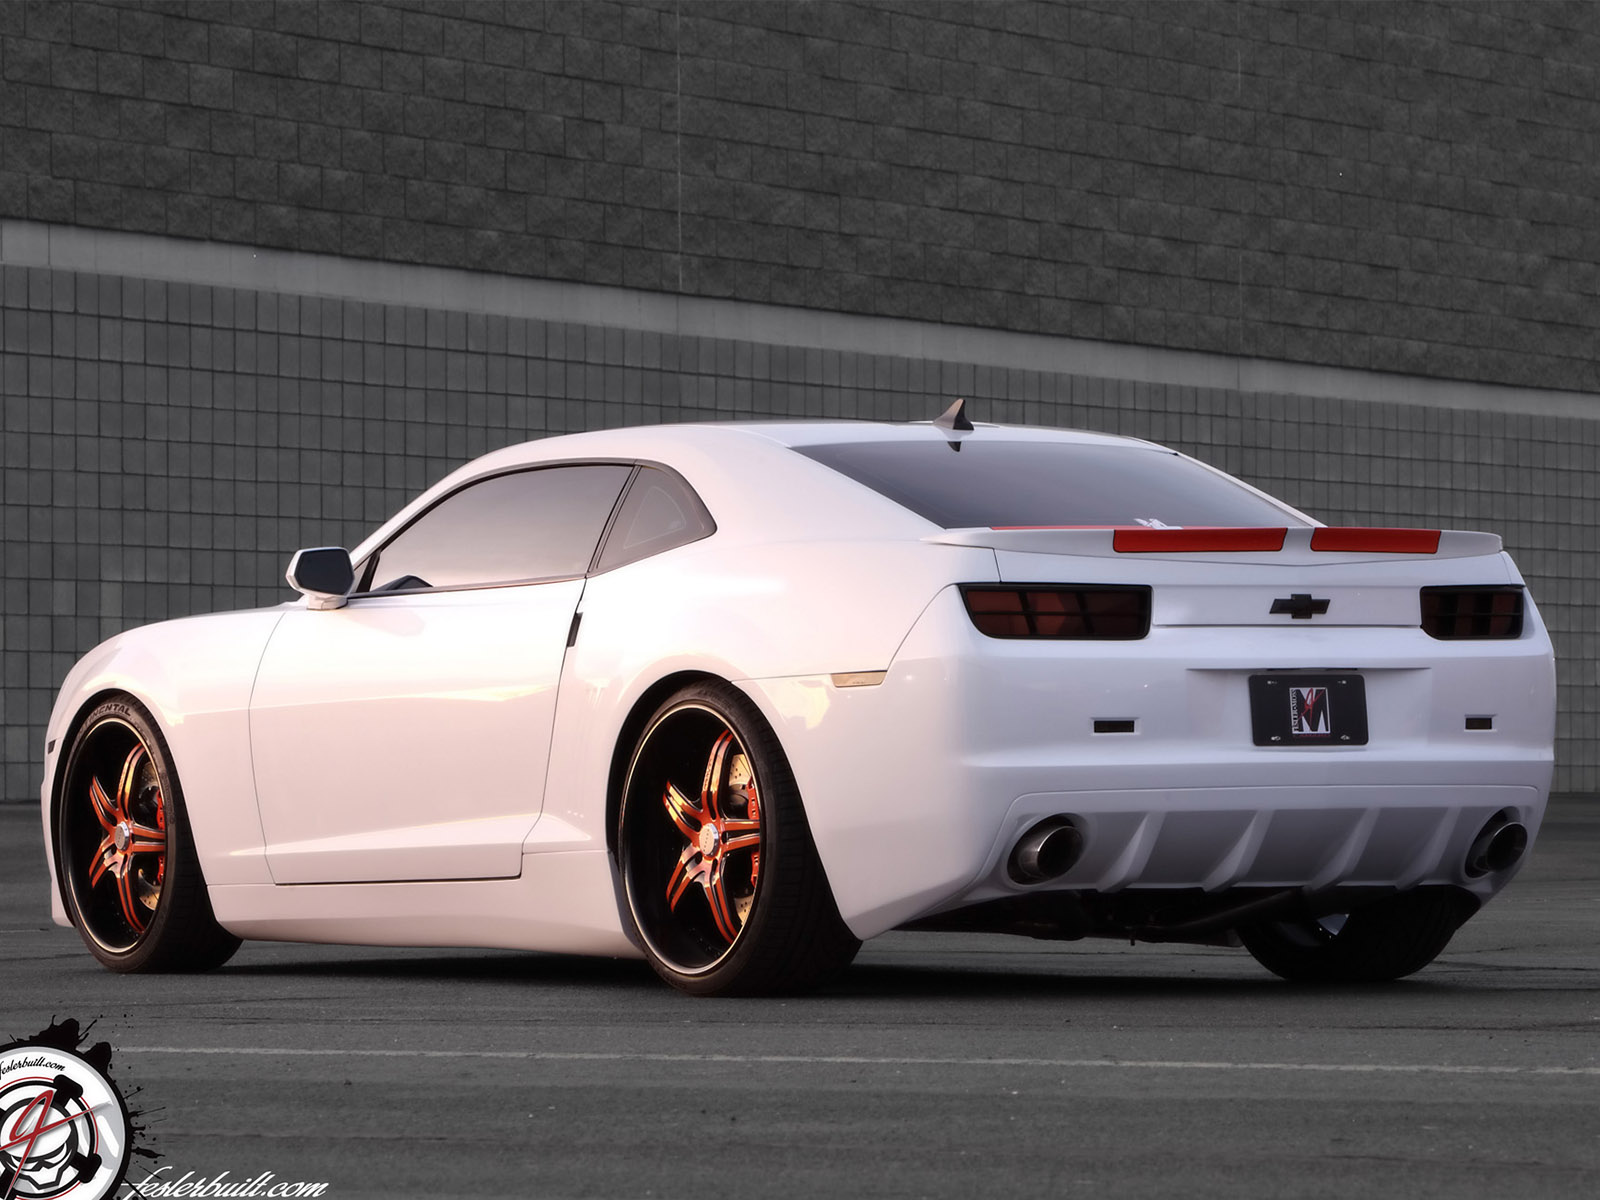 2010, Chevrolet, Camaro, Limited, Edition, Muscle, Hot, Rod, Rods, Tuning, Supercar, Supercars Wallpaper